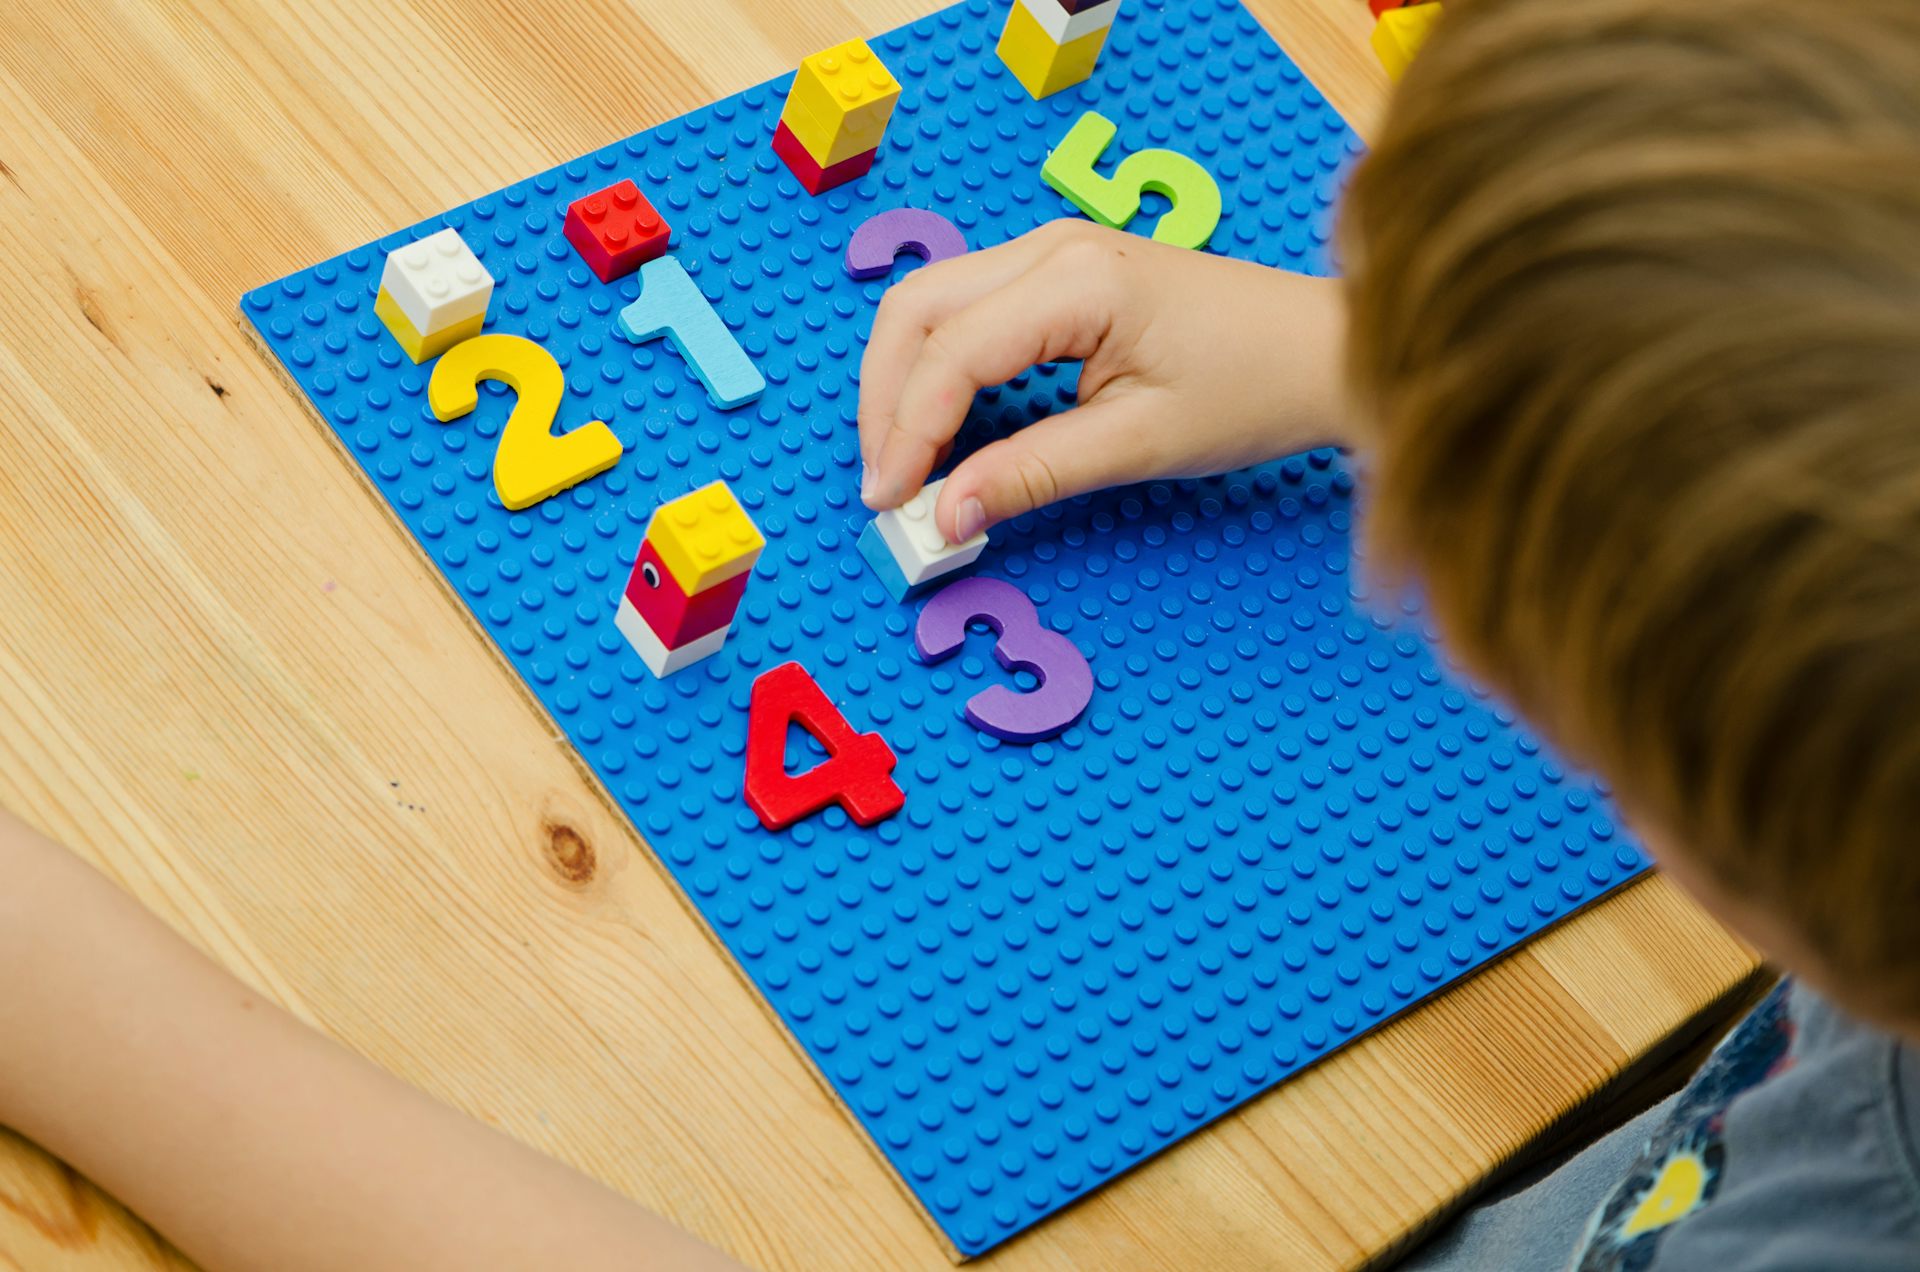 maths toys for 4 year olds